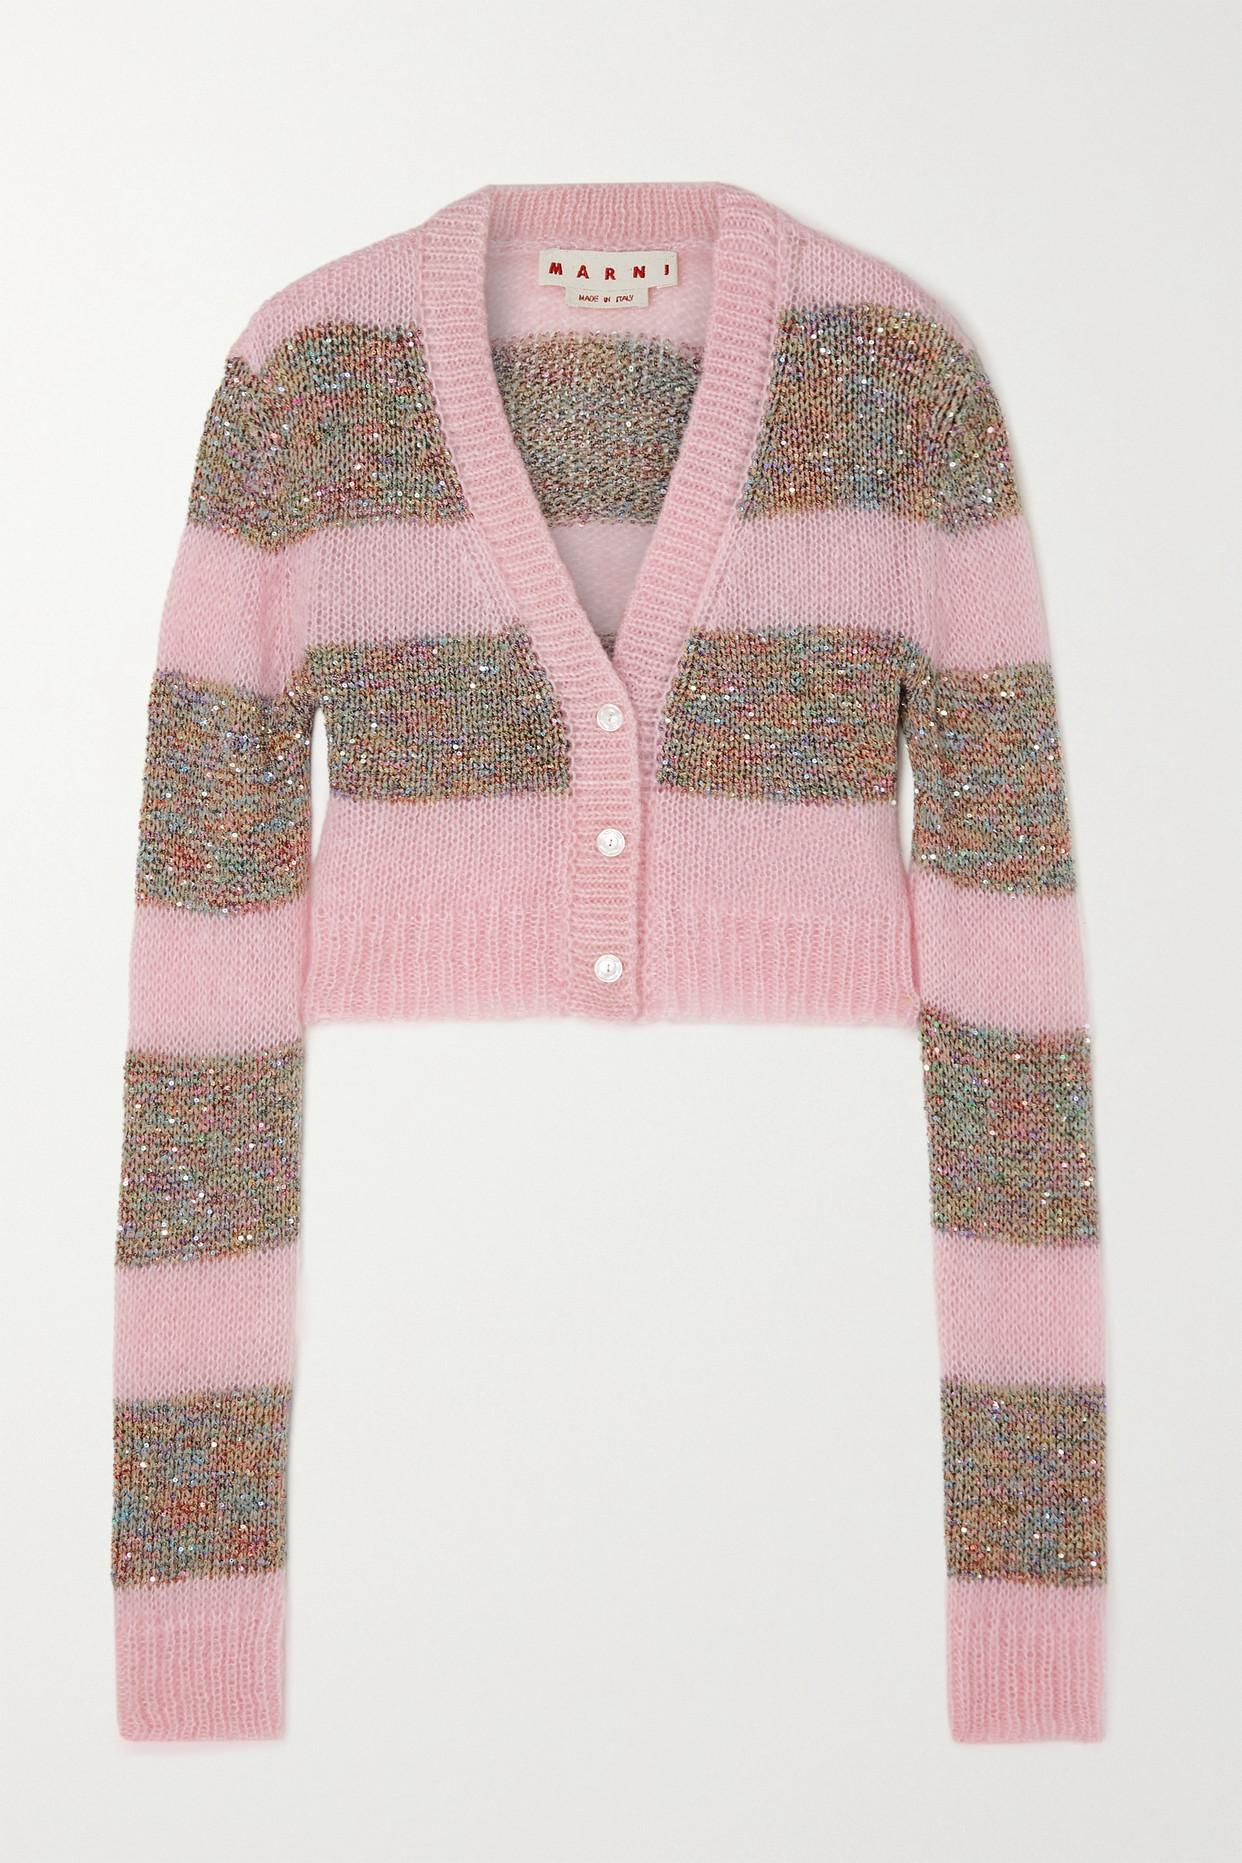 Marni Cropped Sequin-embellished Striped Knitted Cardigan in Pink | Lyst